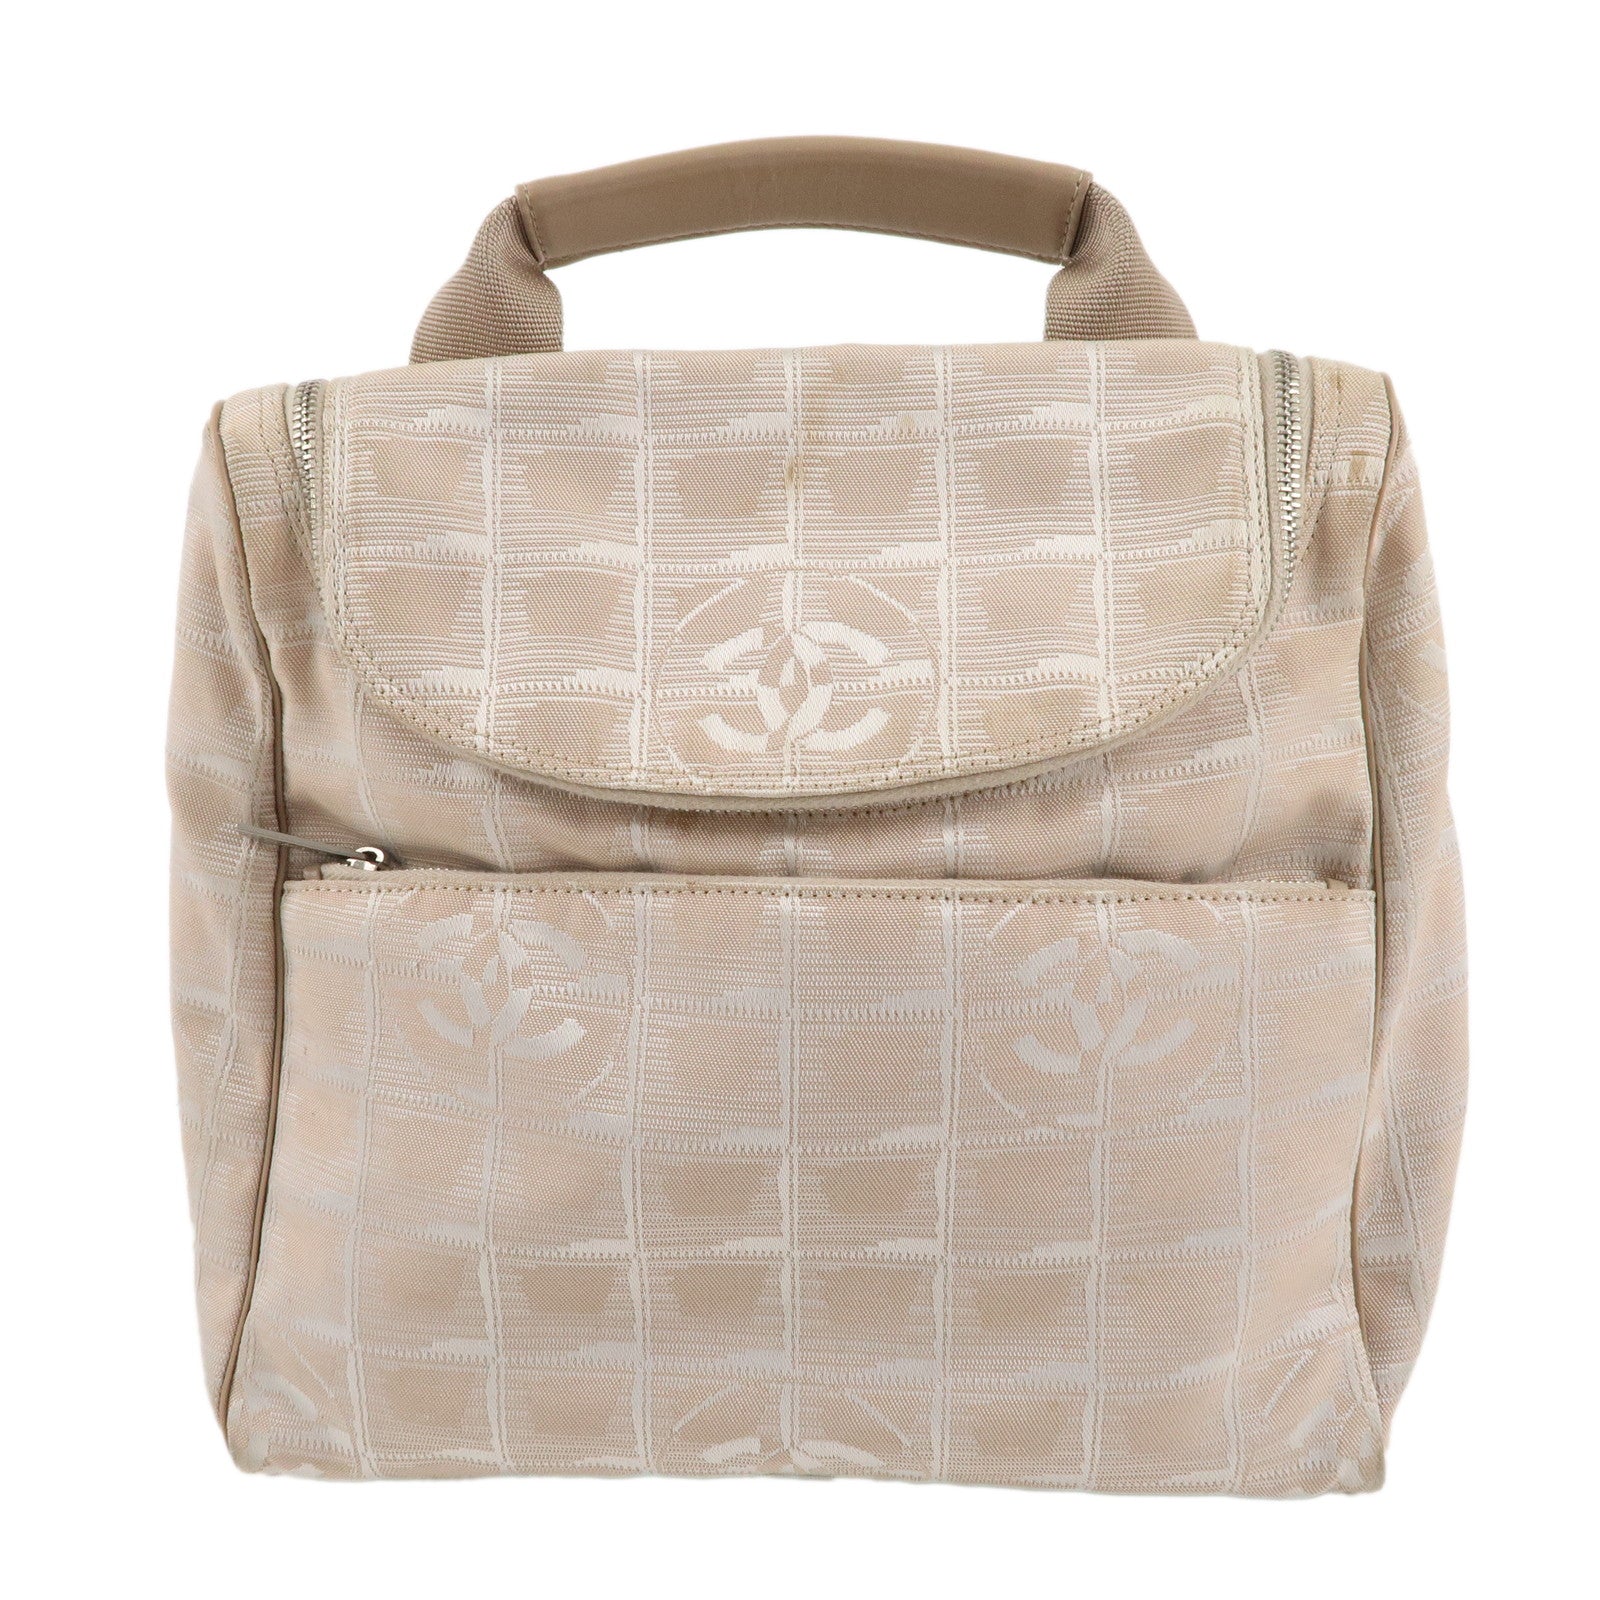 CHANEL-New-Travel-Line-Nylon-Jacquard-2Way-Back-Pack-Beige-A15958